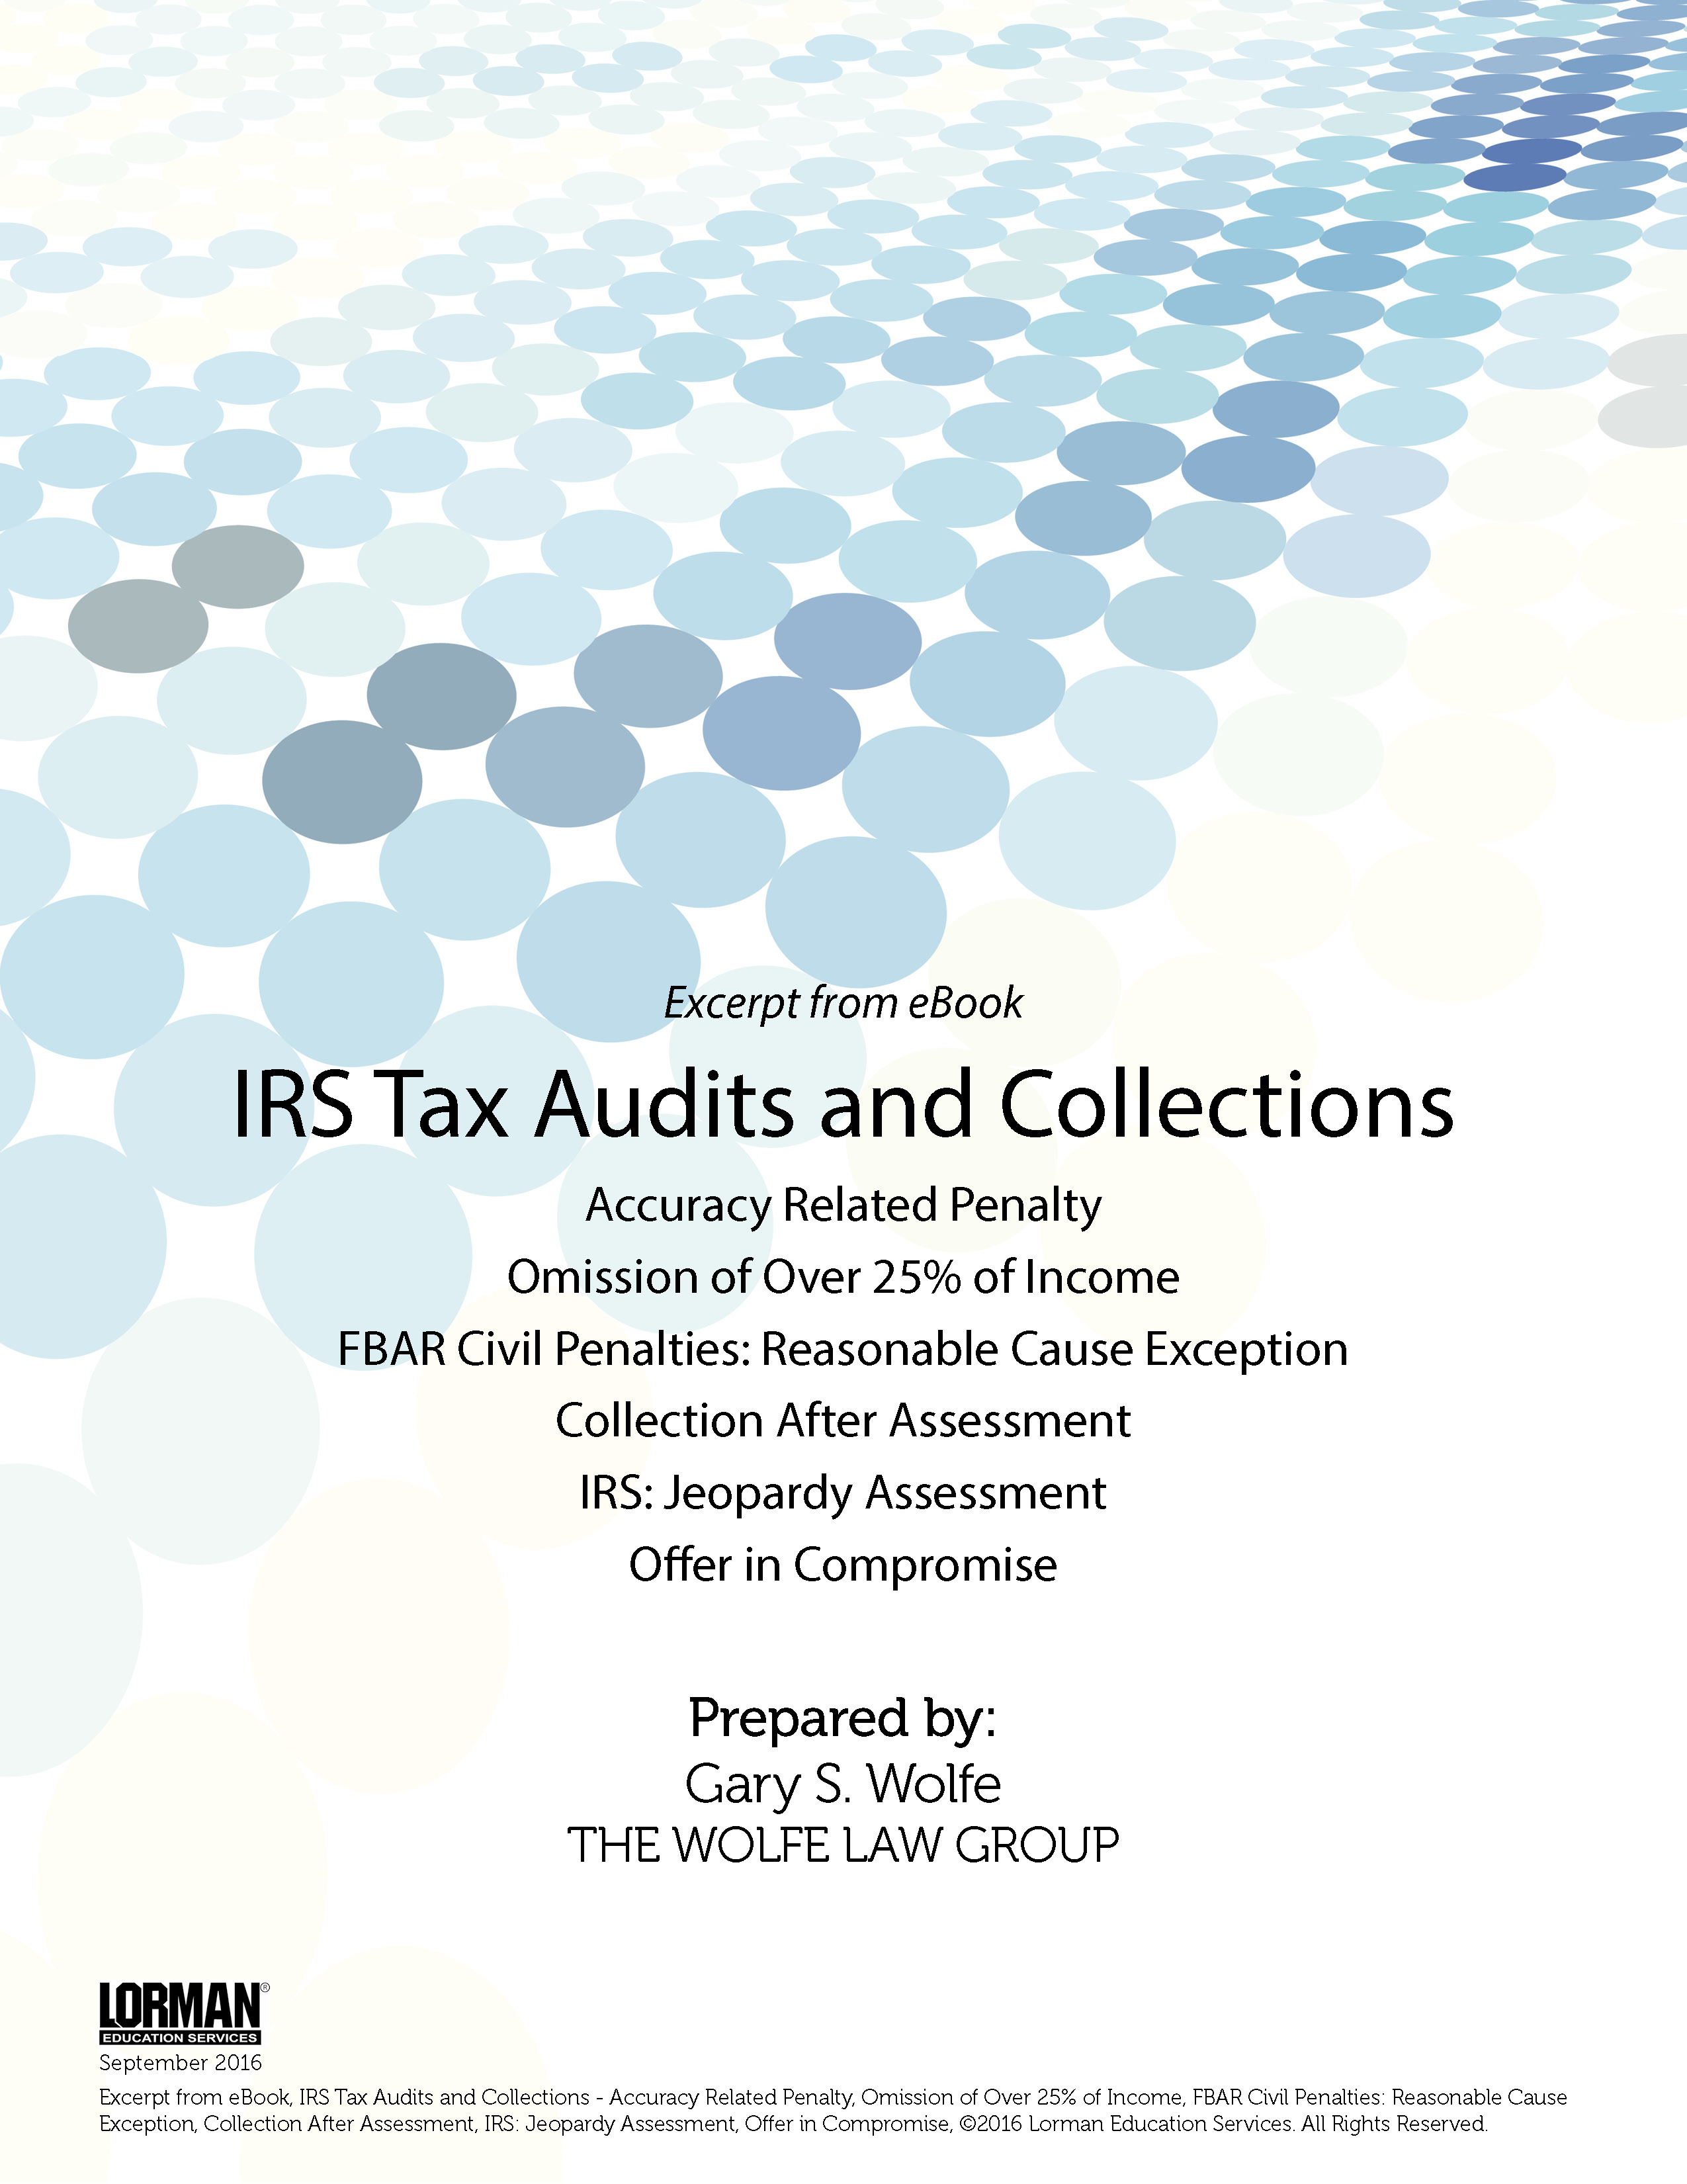 IRS Tax Audits and Collections: Accuracy Related Penalty, FBAR Civil Penalties